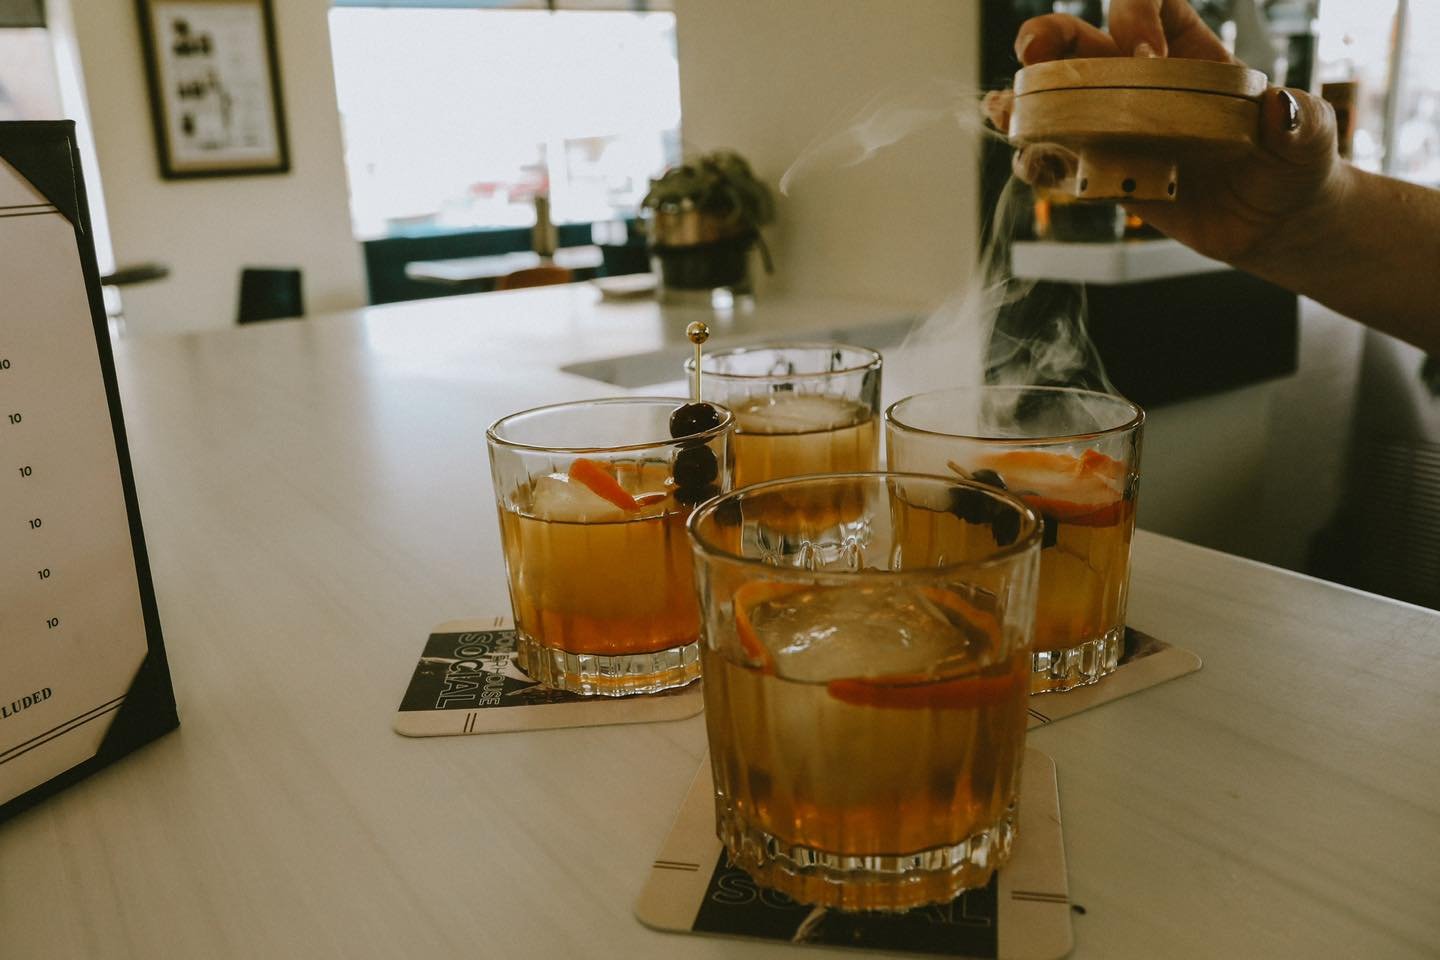 Step into Roaring Wednesday&rsquo;s at Powerhouse Social tonight! 🥃 Experience our exclusive smoked &quot;Old Fashioned&quot; cocktails and kickstart an unforgettable evening. Let&rsquo;s make this Wednesday one for the books! 🎉 #PowerhouseSocial #